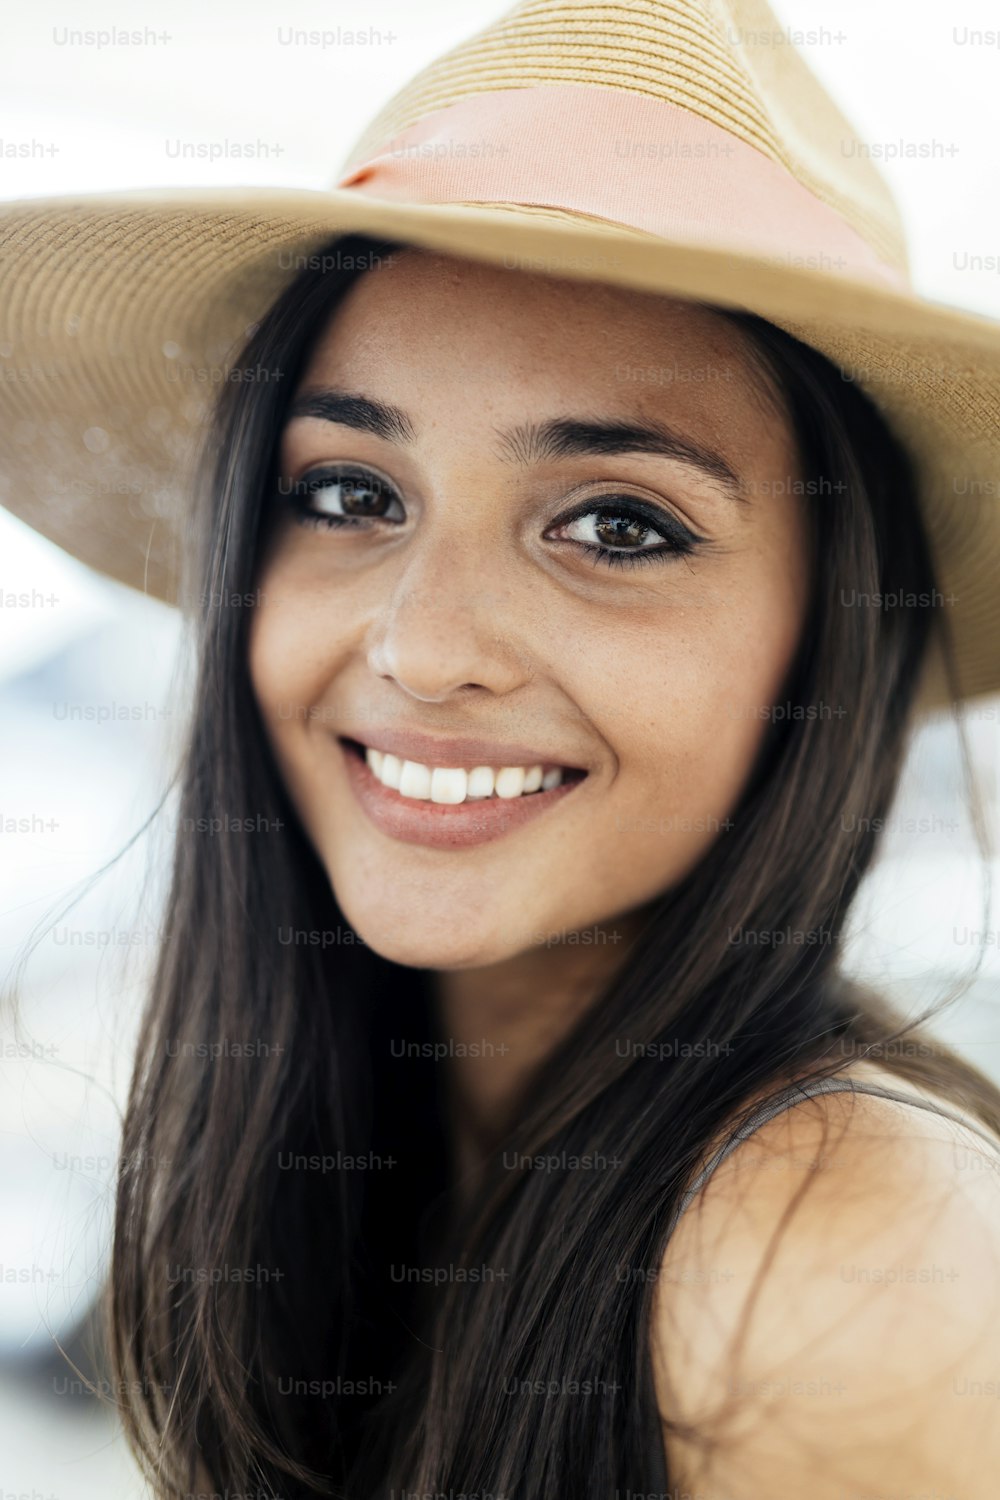 Woman in hat smiling and being truly happy